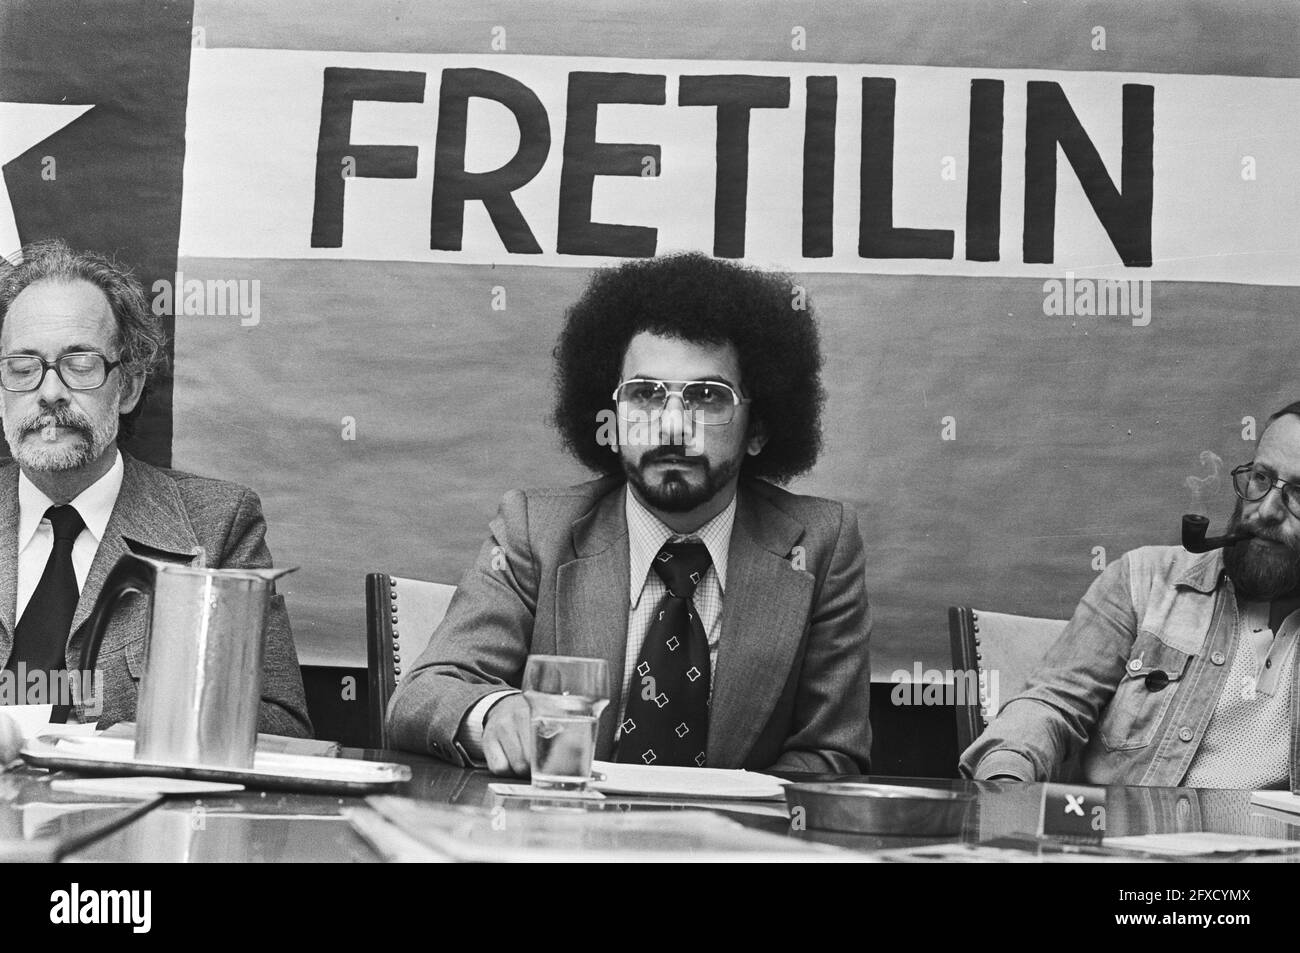 Press conference with Leonel Andrade (Fretilin) and Jose Ramos Horta (Minister of Foreign Affairs East Timor and Secretary General Frelimo) in Krasnapolsky. Ramos Horta, June 8, 1976, press conferences, resistance movements, The Netherlands, 20th century press agency photo, news to remember, documentary, historic photography 1945-1990, visual stories, human history of the Twentieth Century, capturing moments in time Stock Photo